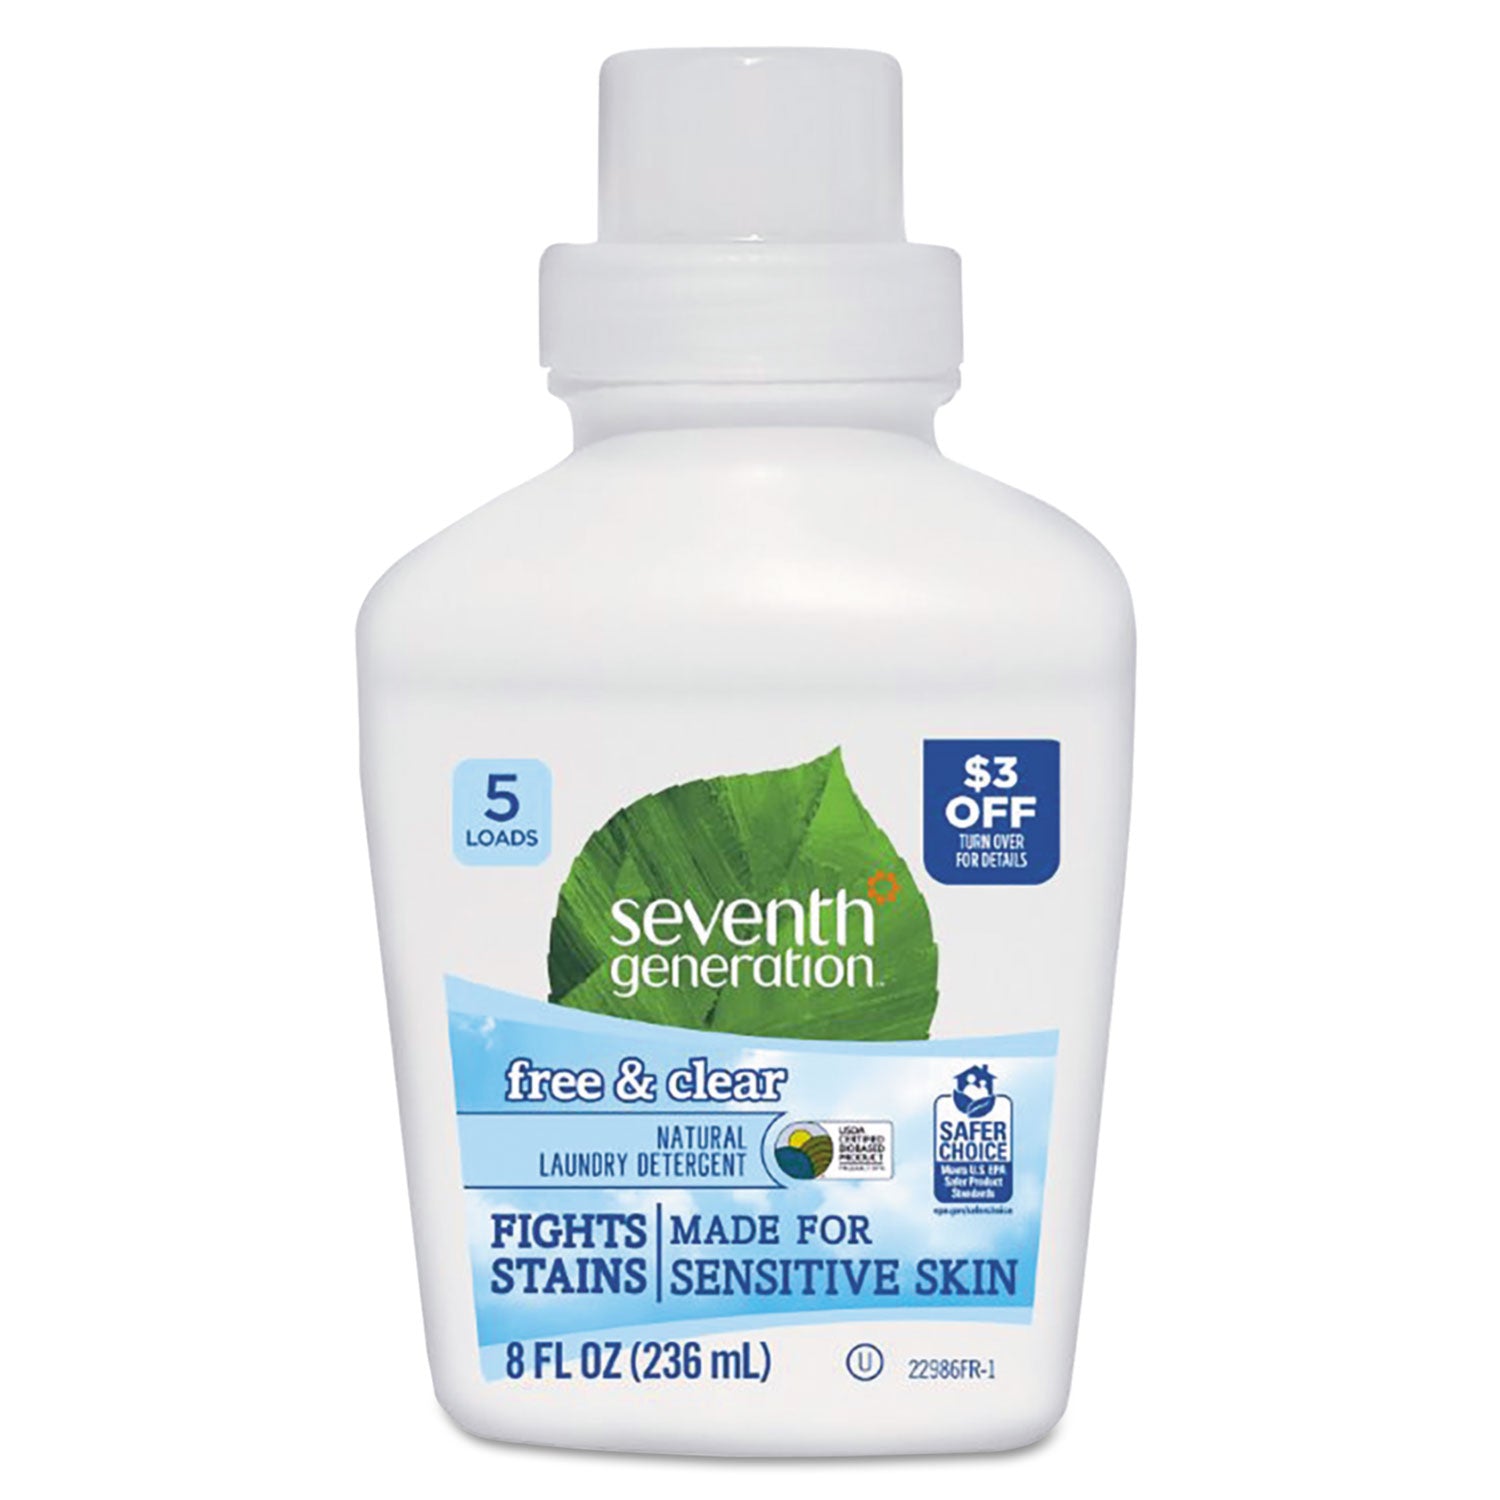 natural-liquid-laundry-detergent-free-and-clear-8-oz-bottle_sev22986ea - 1